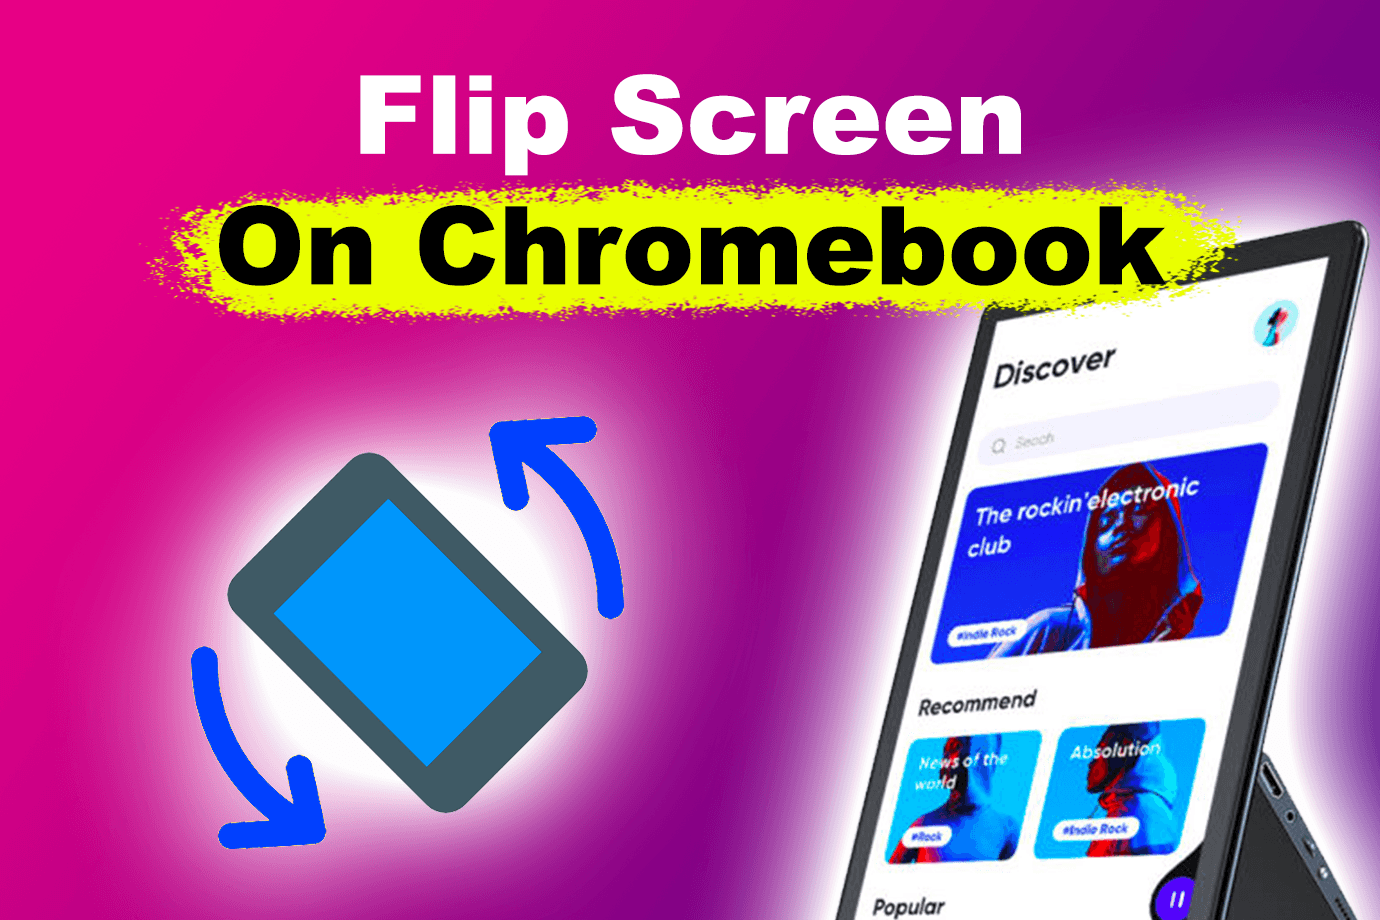 How to Flip Screen on Chromebook